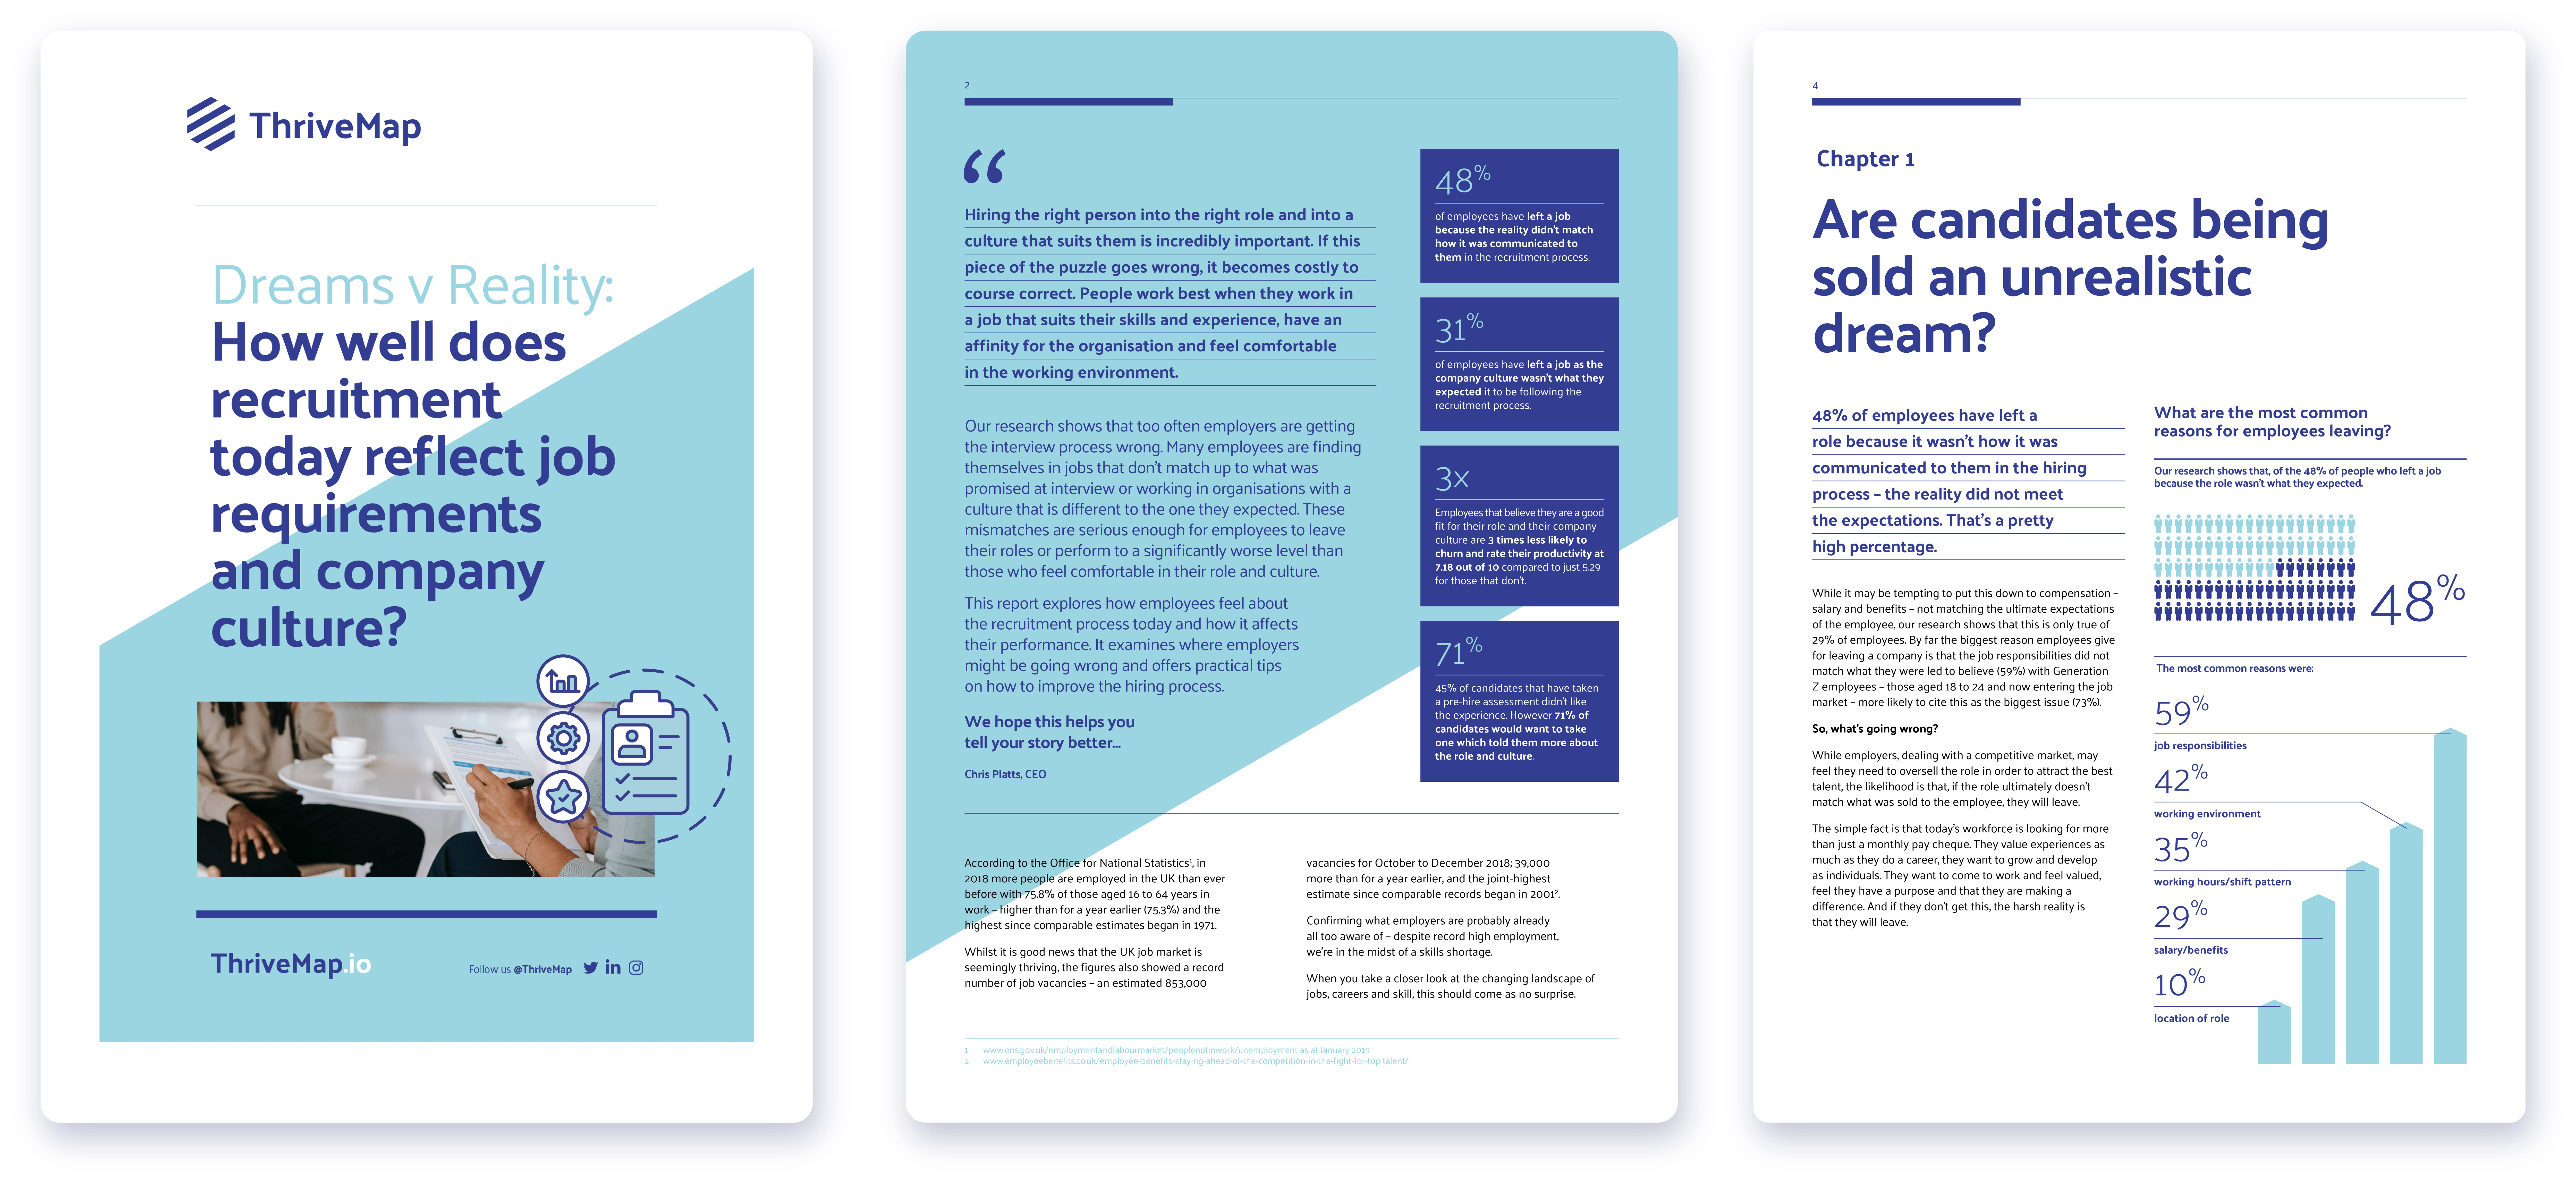 A preview of the whitepaper "Dreams v Reality: How well does recruitment today reflect job requirements and company culture?". The preview shows some sample quotes, statistics, and graphs. You can download the whitepaper below.